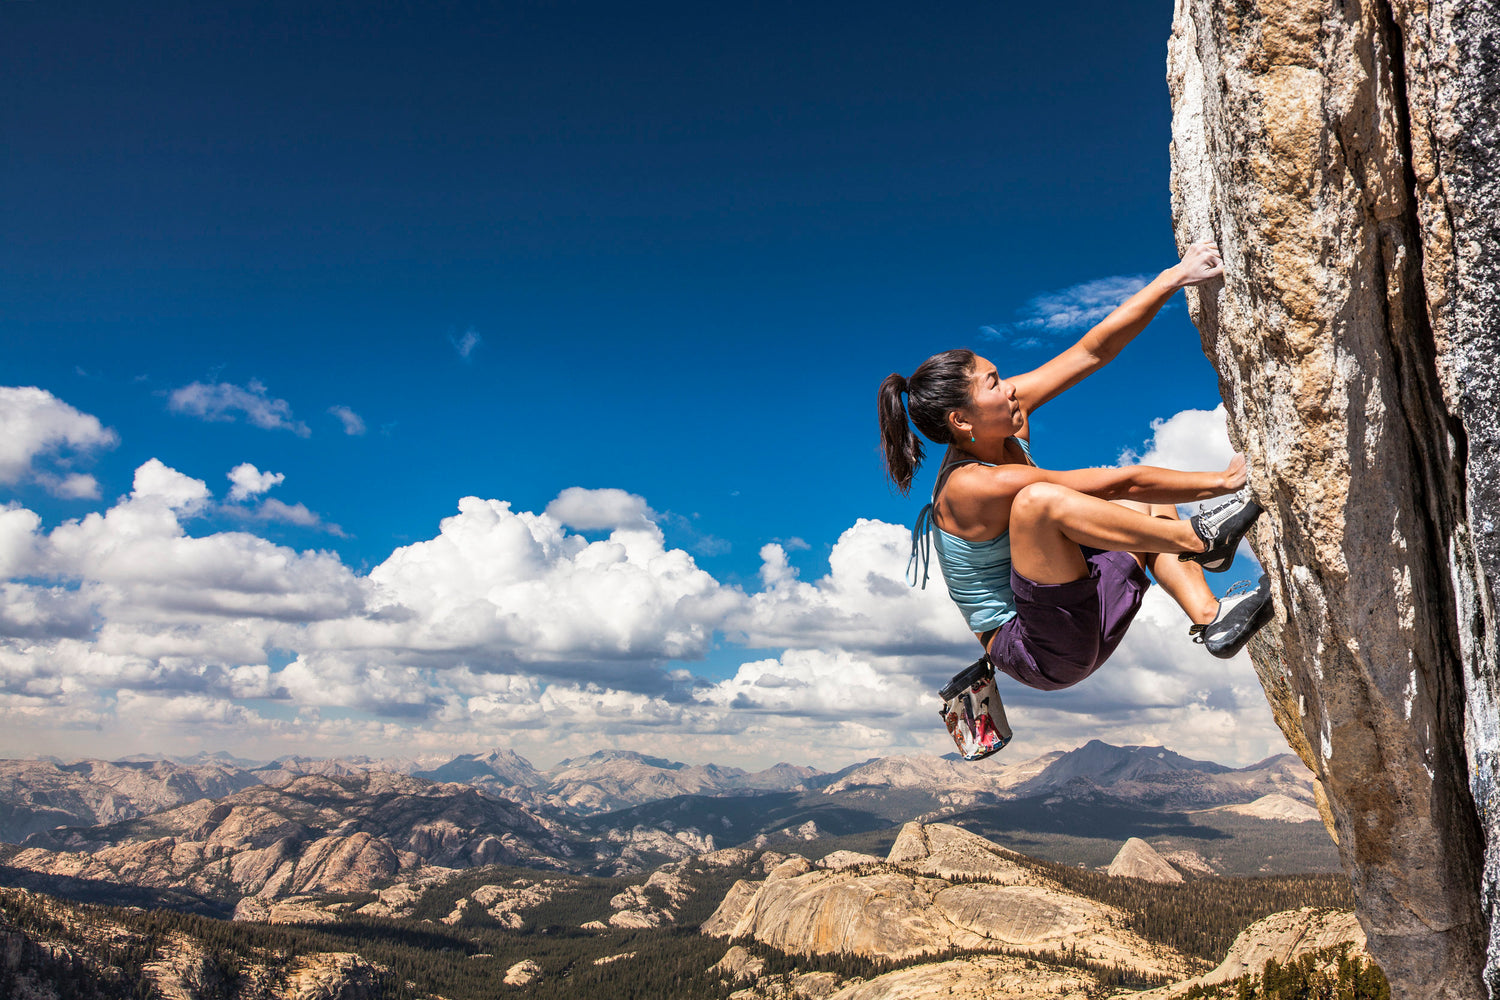 Woman rock climbing in crunched position, ready for powerful move upward, and bouldery landscape in distant background -- elevation implied. Credit: https://www.melaninbasecamp.com/trip-reports/2018/7/31/eight-amazing-asian-pacific-islander-women-climbers